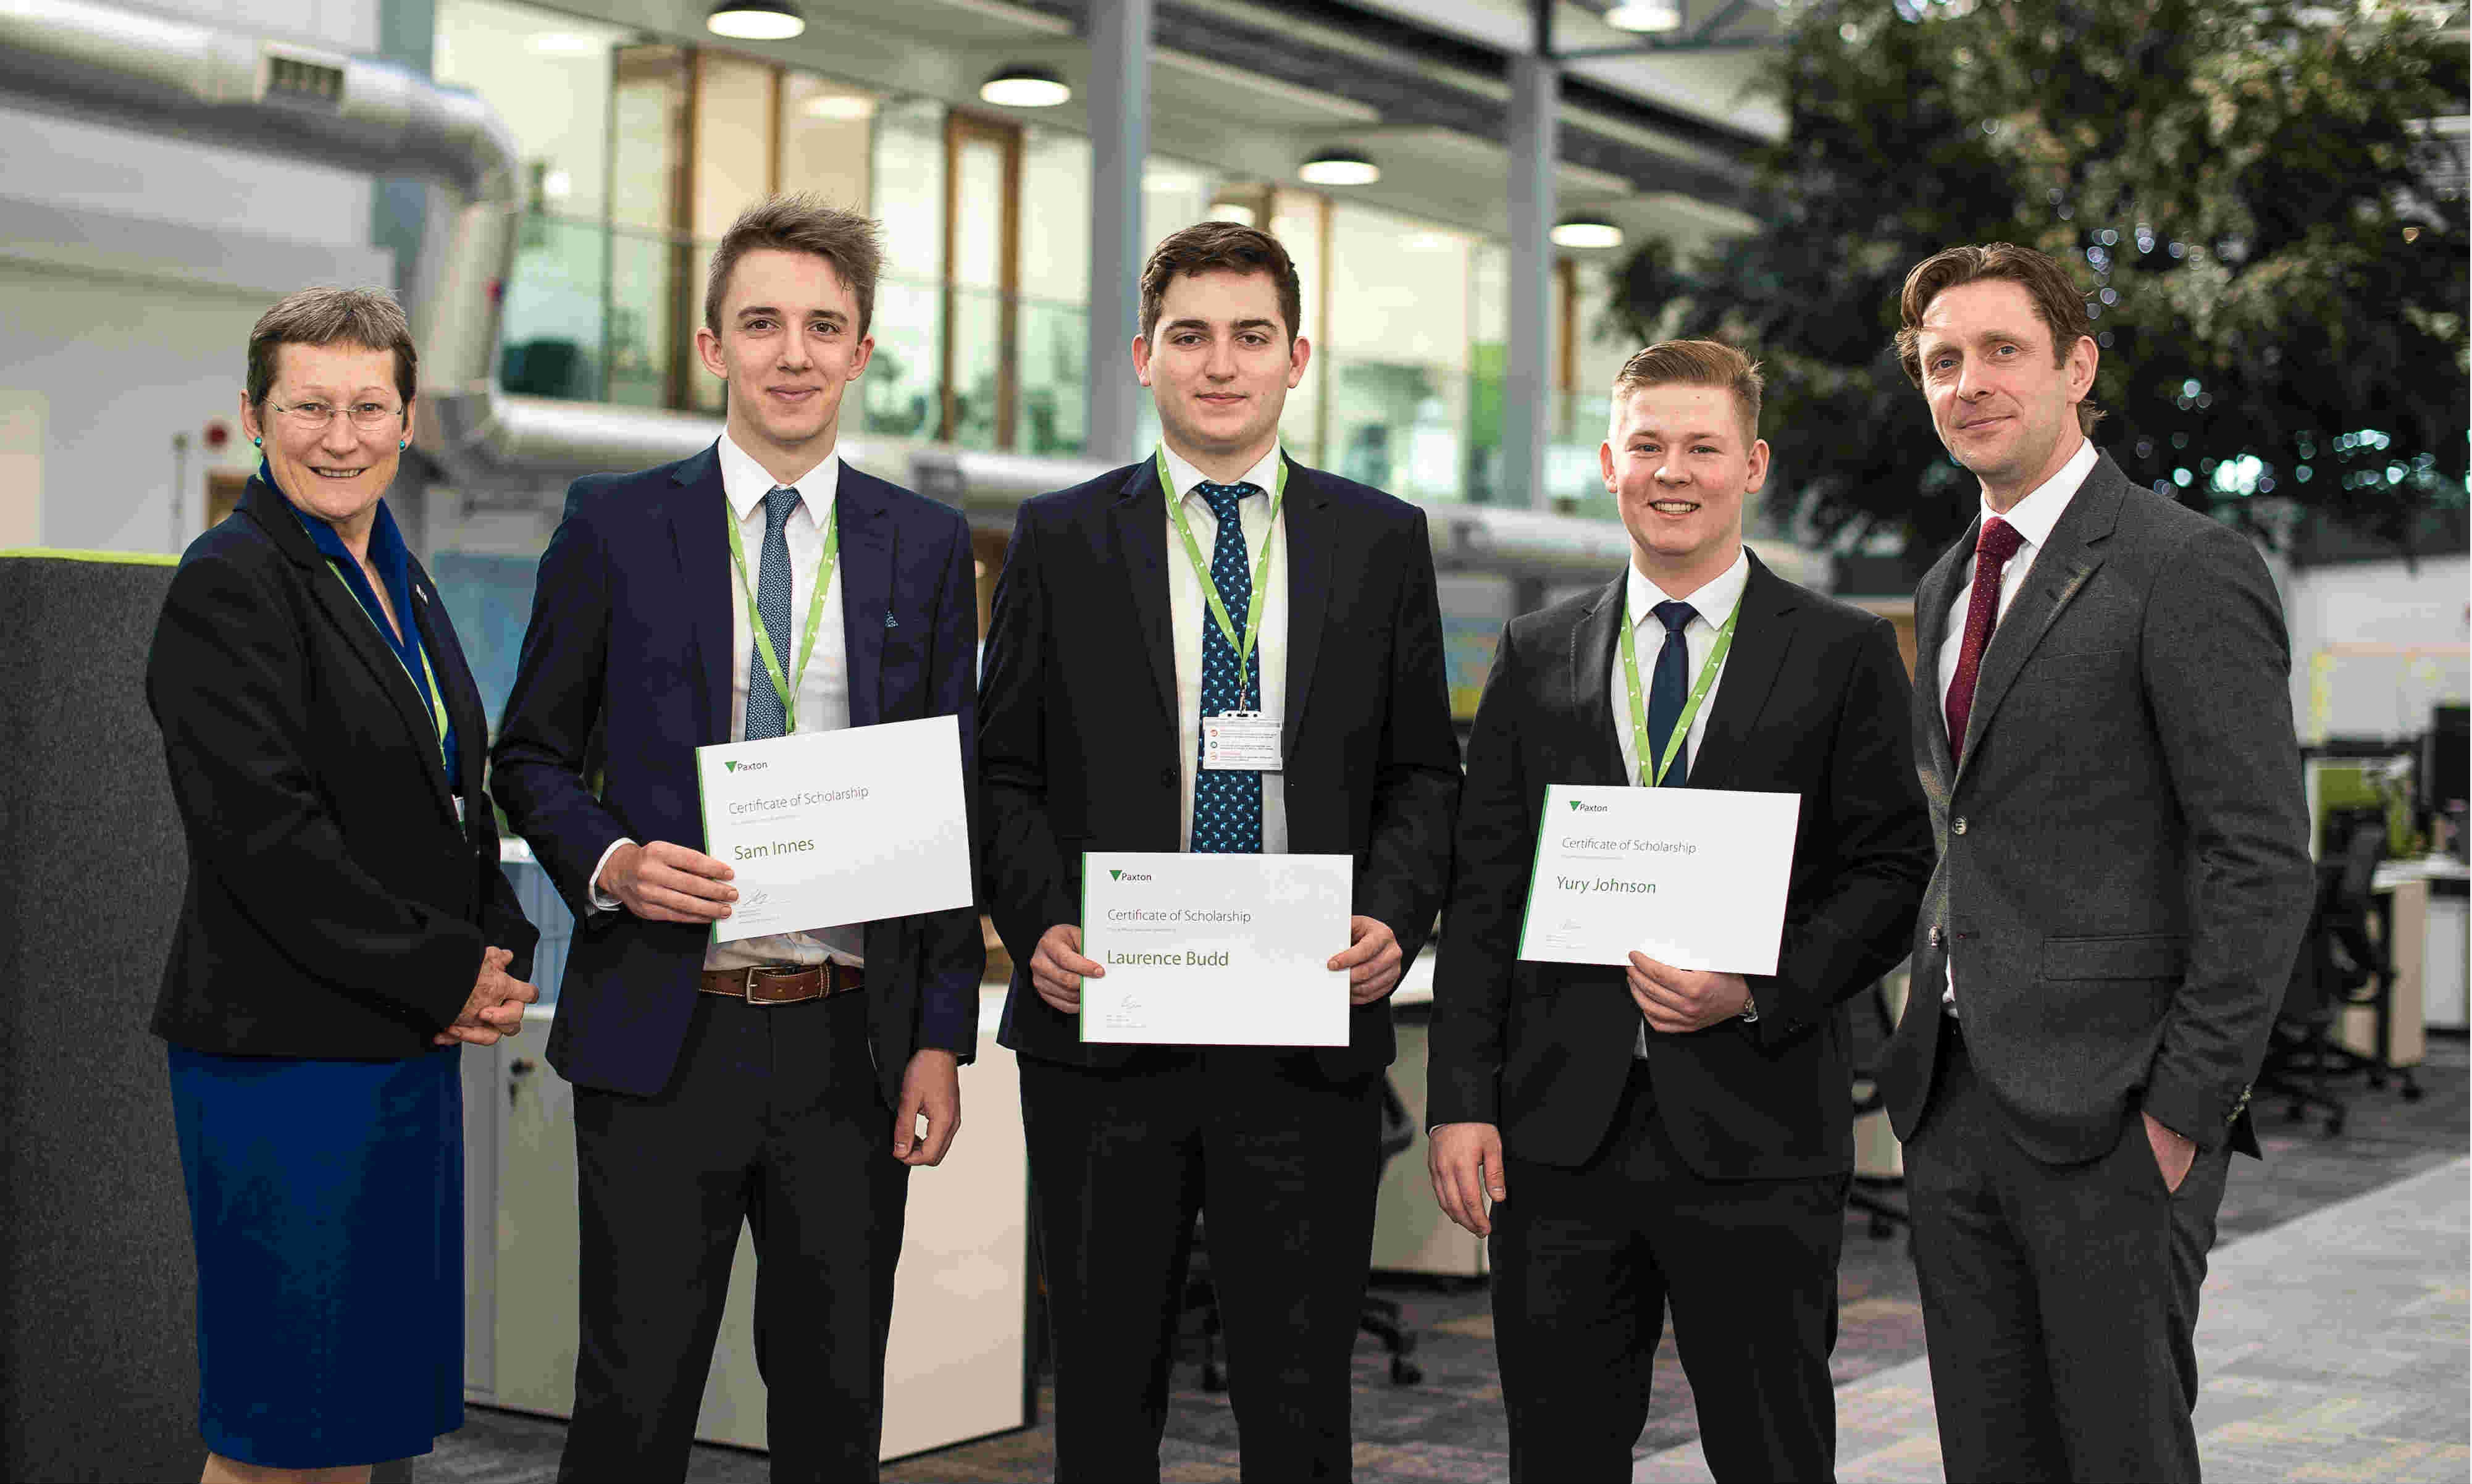 Paxton announces recipients of its new scholarship programme